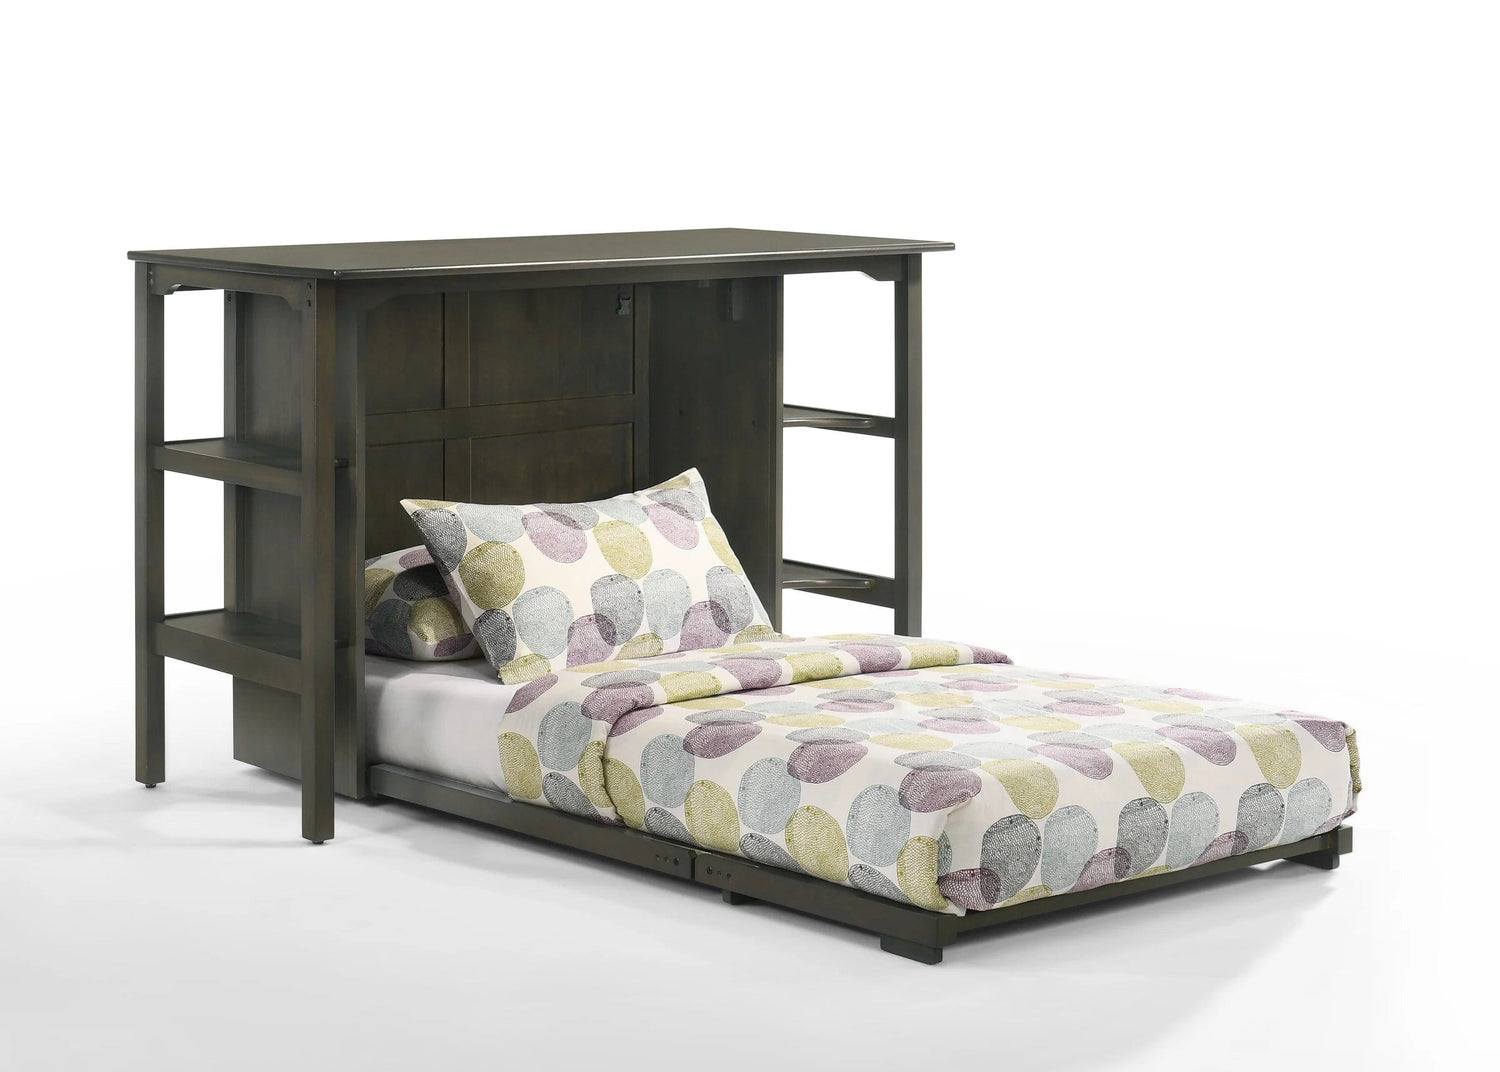 Night and Day Furniture Siesta Twin Desk Bed in Stonewash with Mattress and Chair